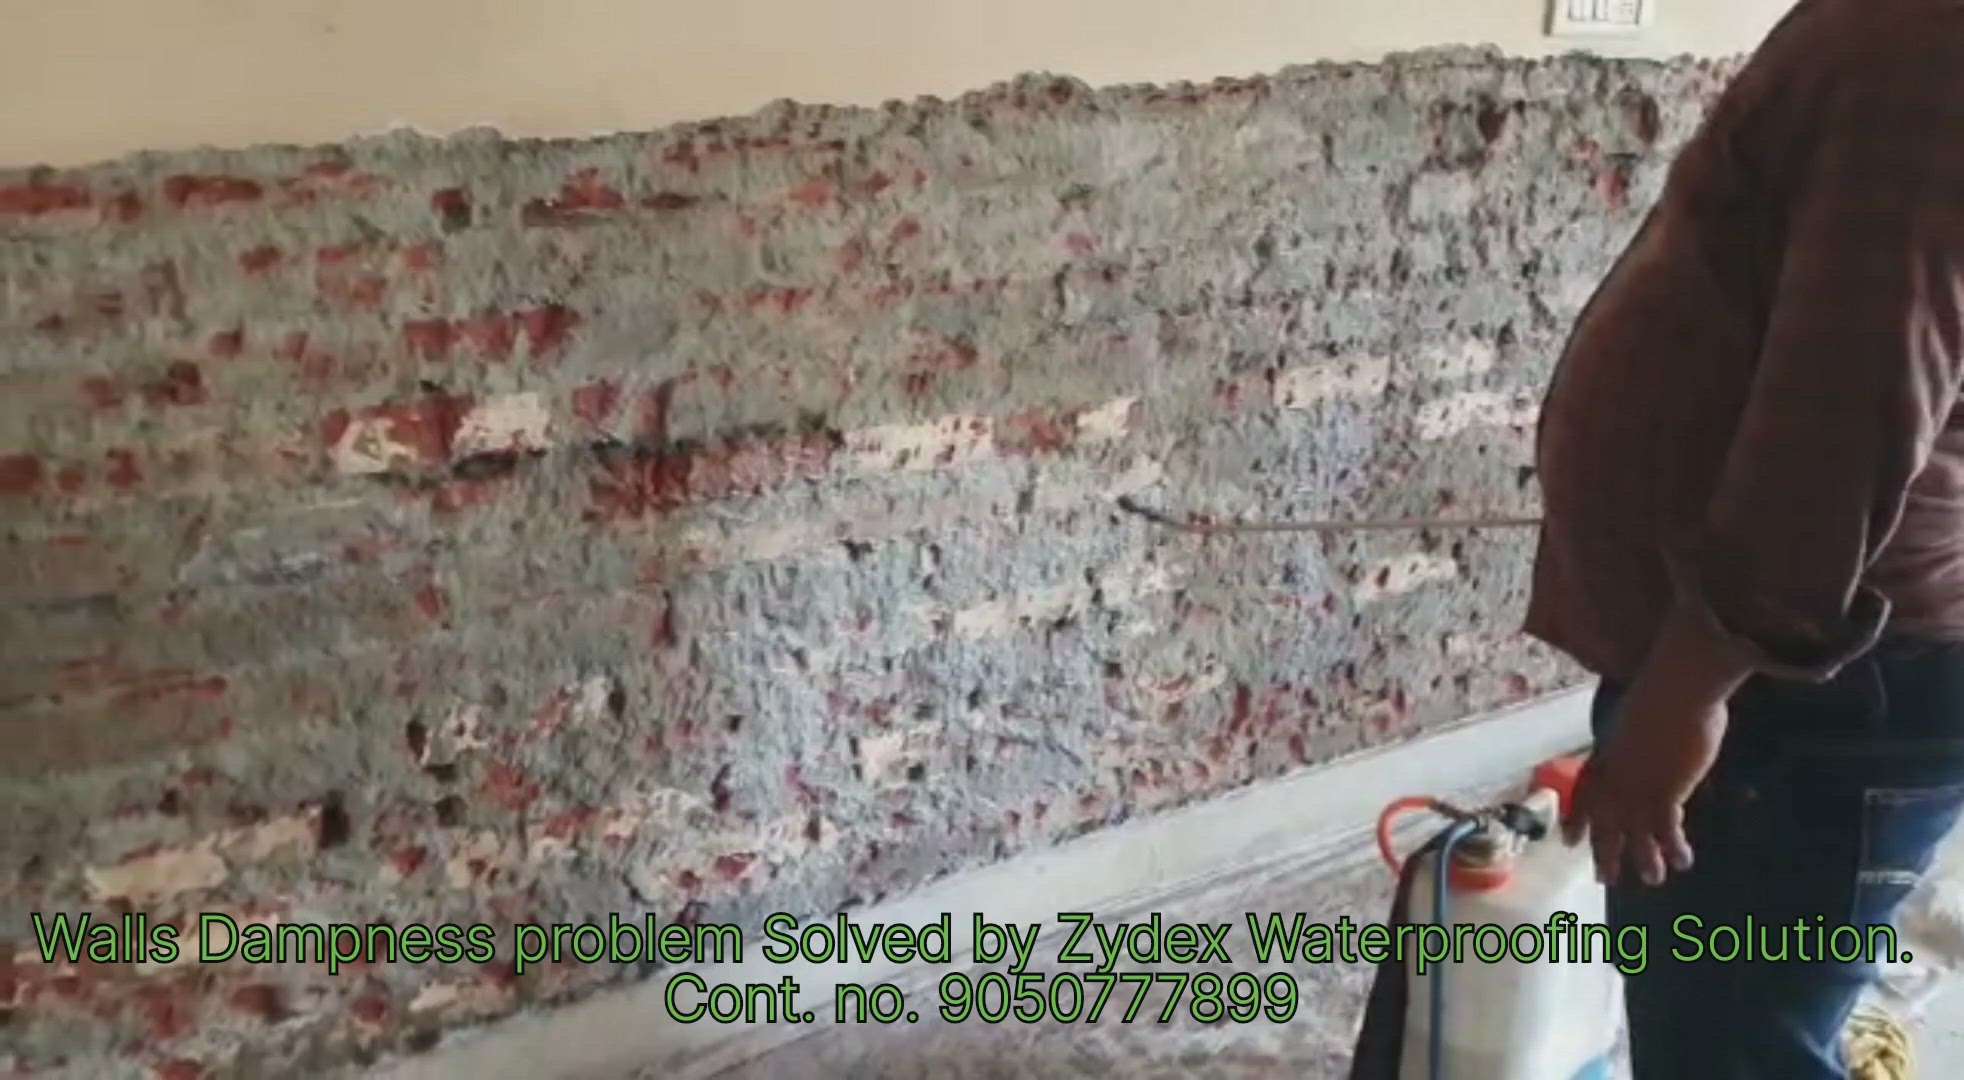 Old Walls Dampness Solution by M.T Fixit Waterproofing Solution Co. Cont. no. 9050777899